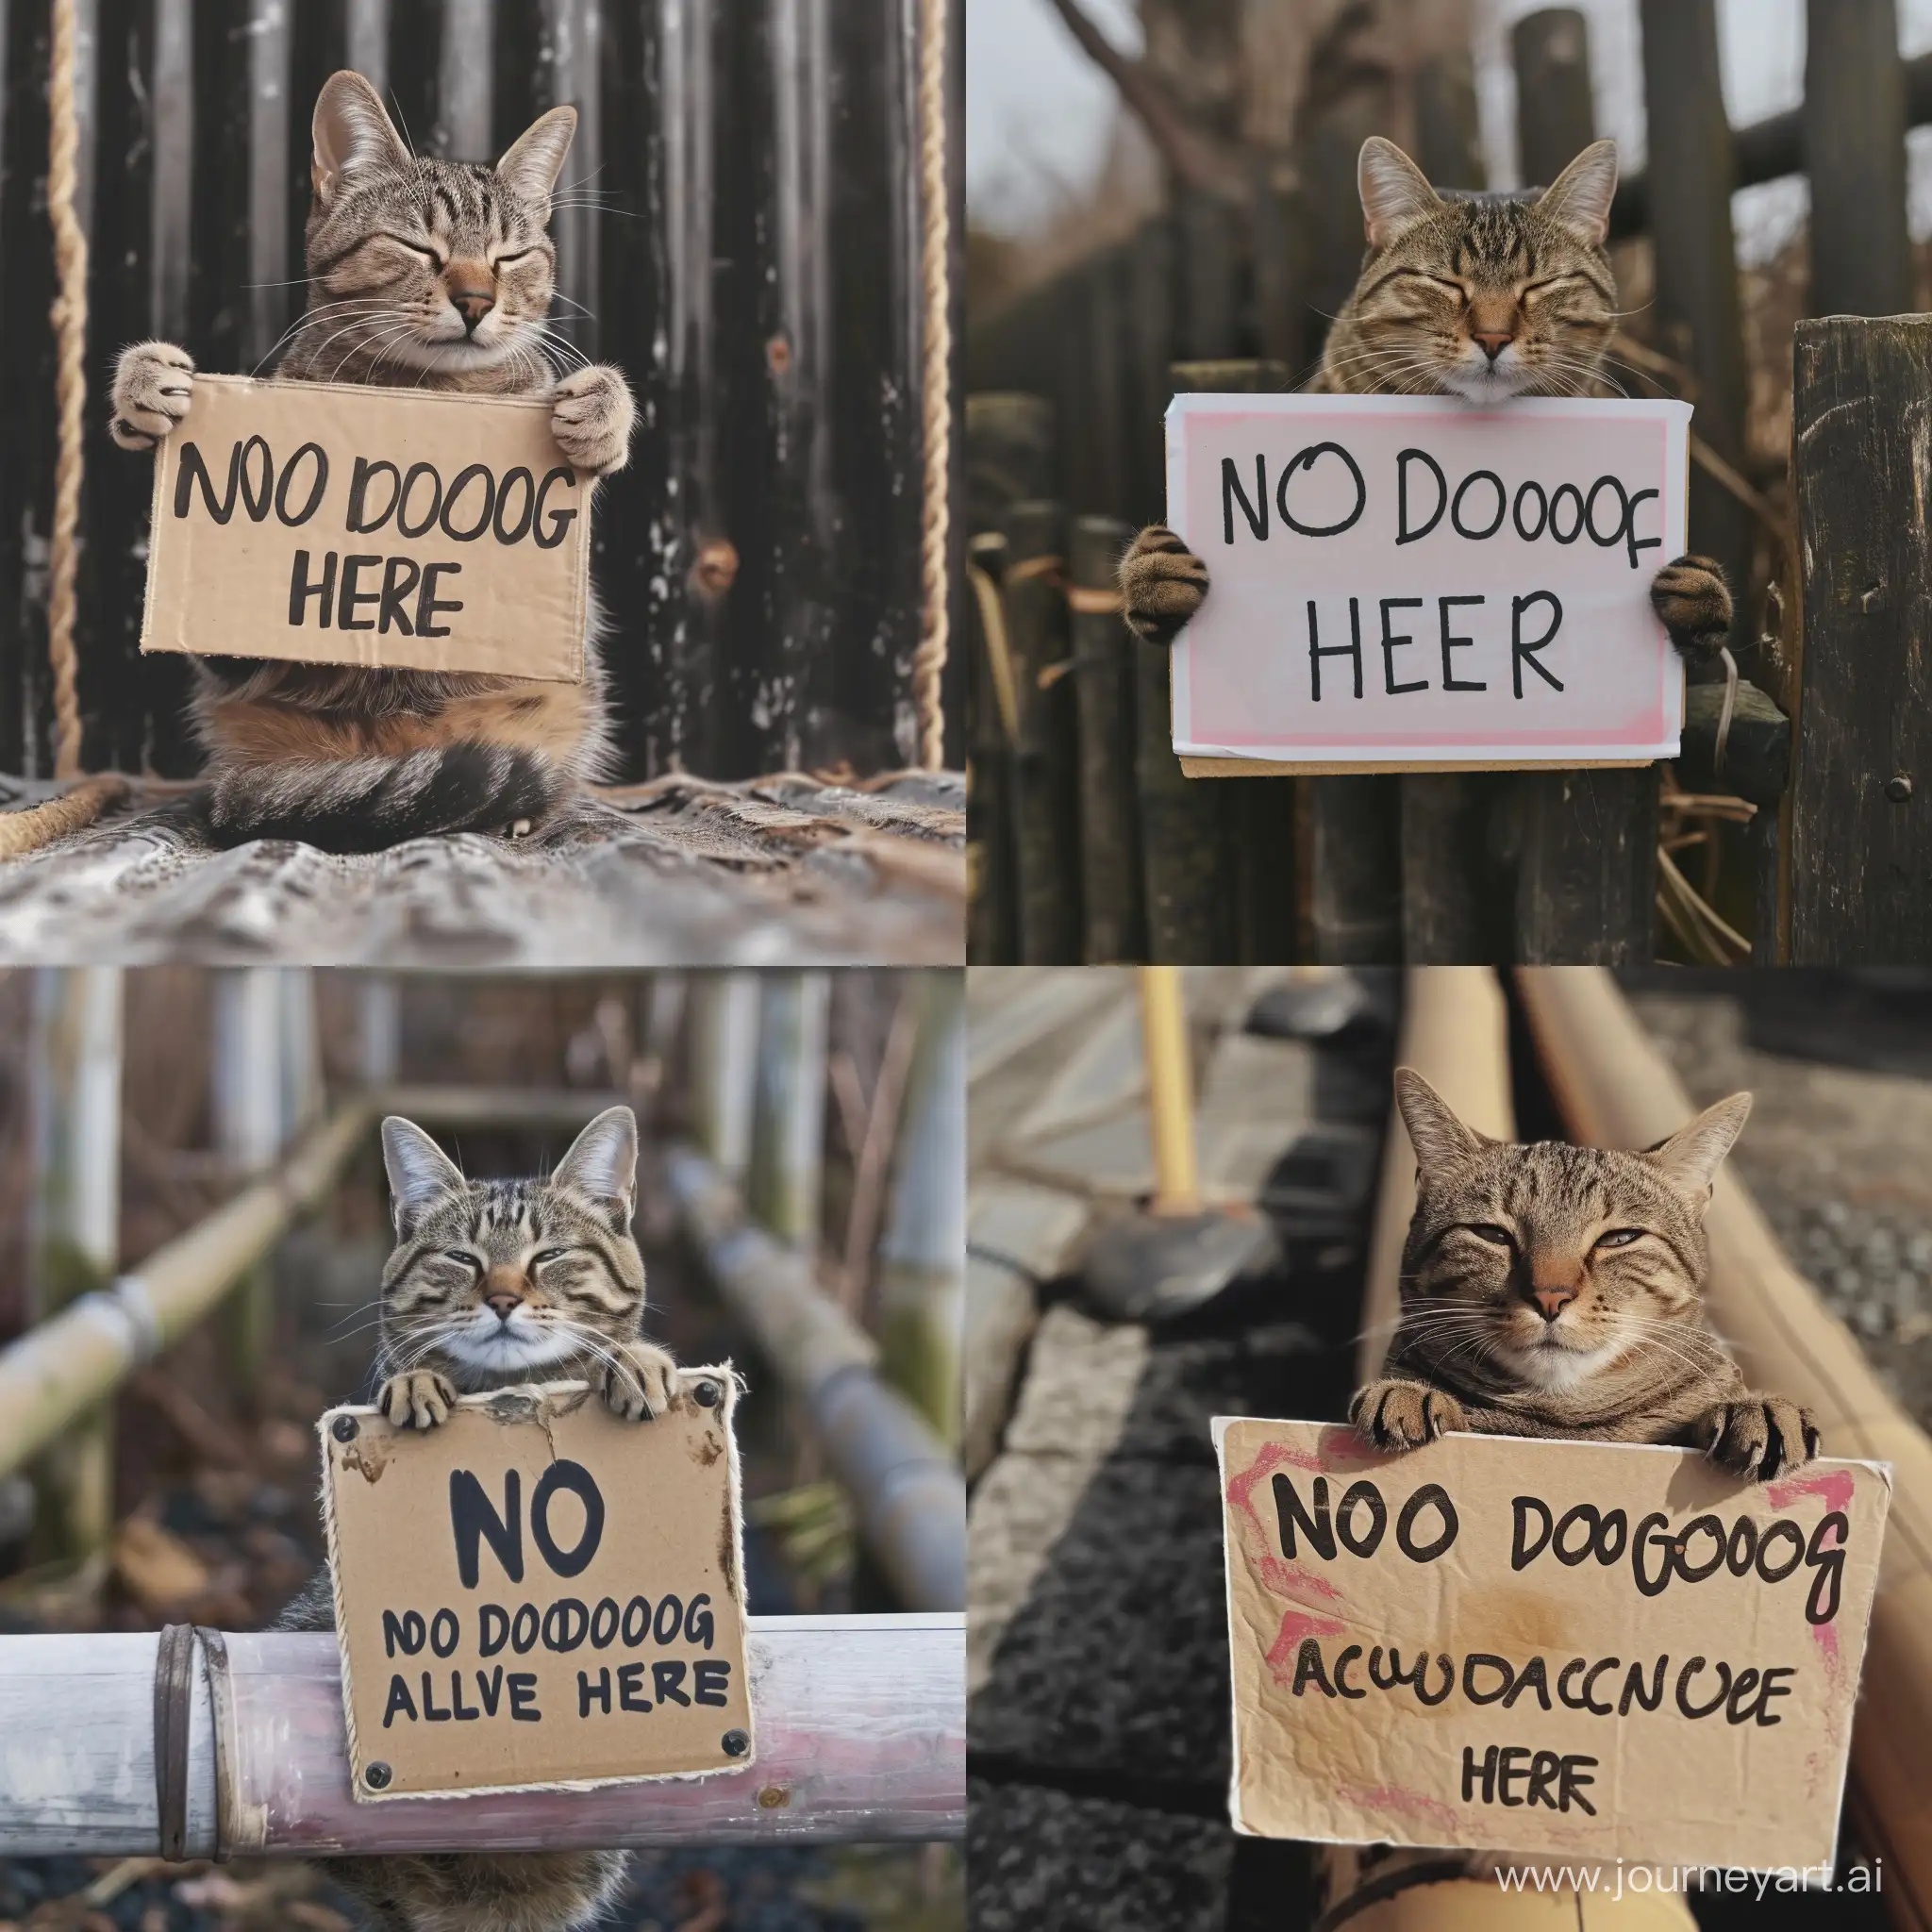 Assertive-Cat-Holding-NO-DOGS-ALLOWED-HERE-Sign